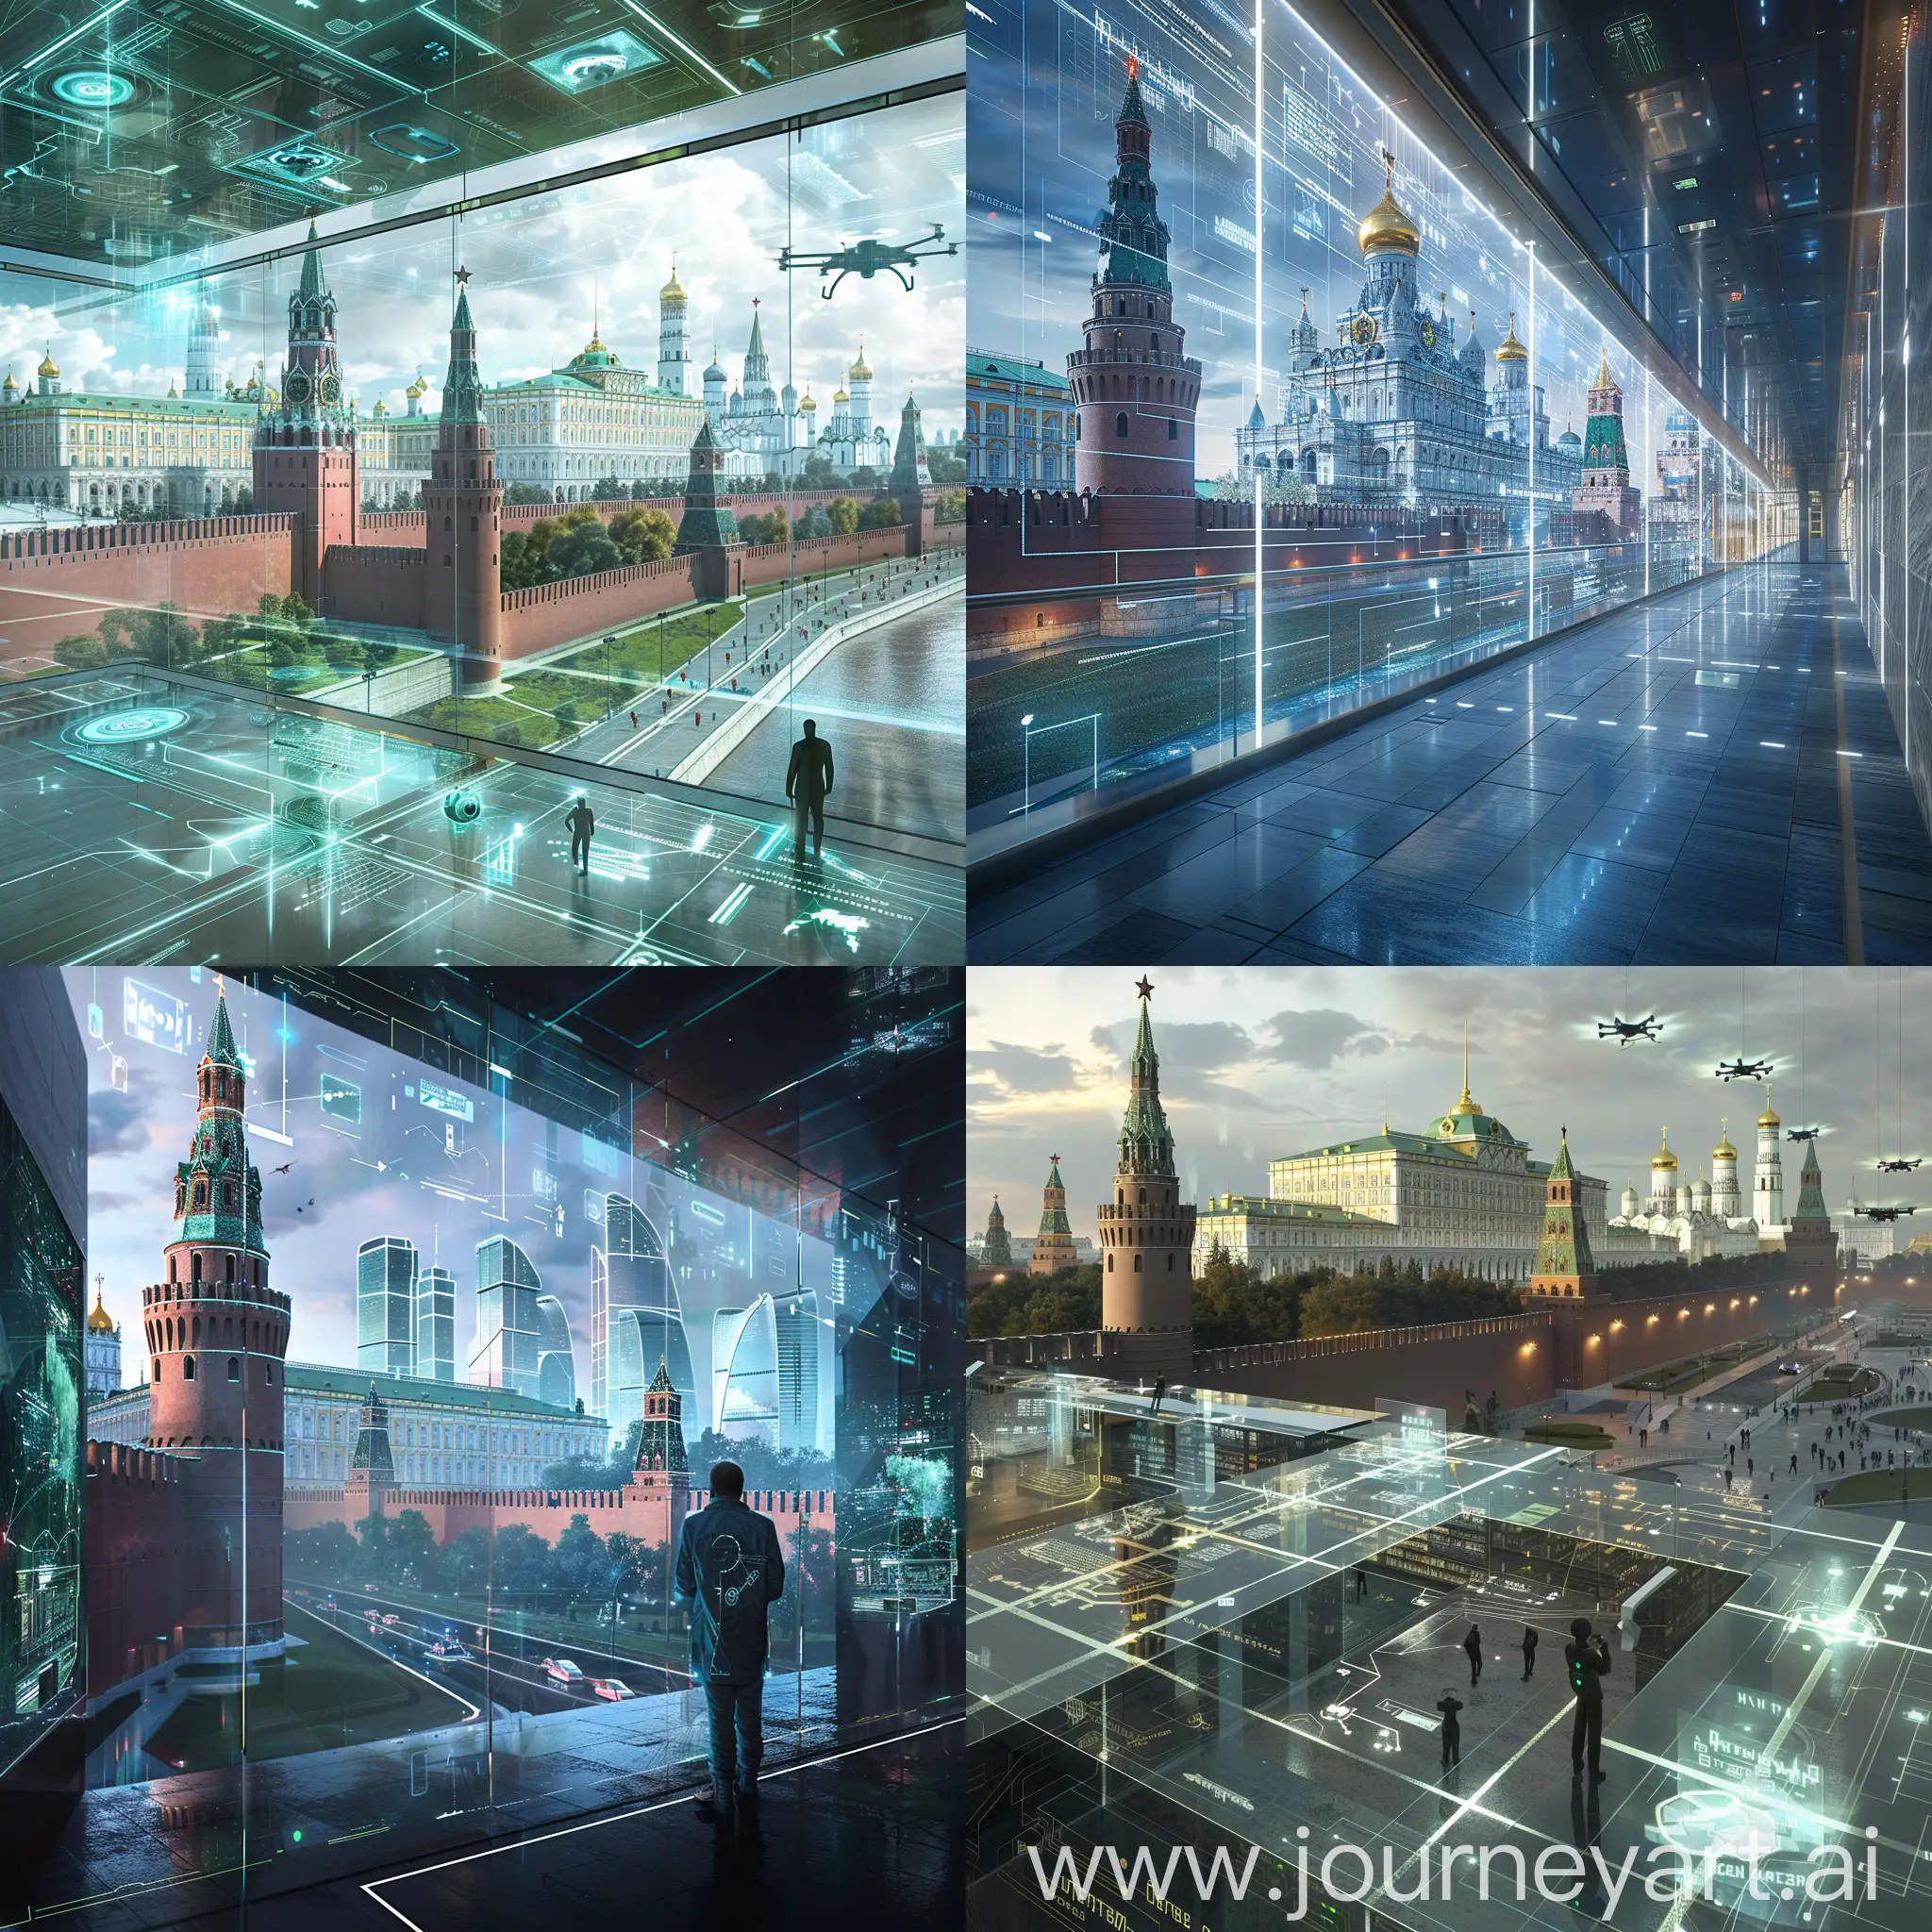 Futuristic-Moscow-Kremlin-with-Holographic-Communication-Systems-and-Smart-Walls